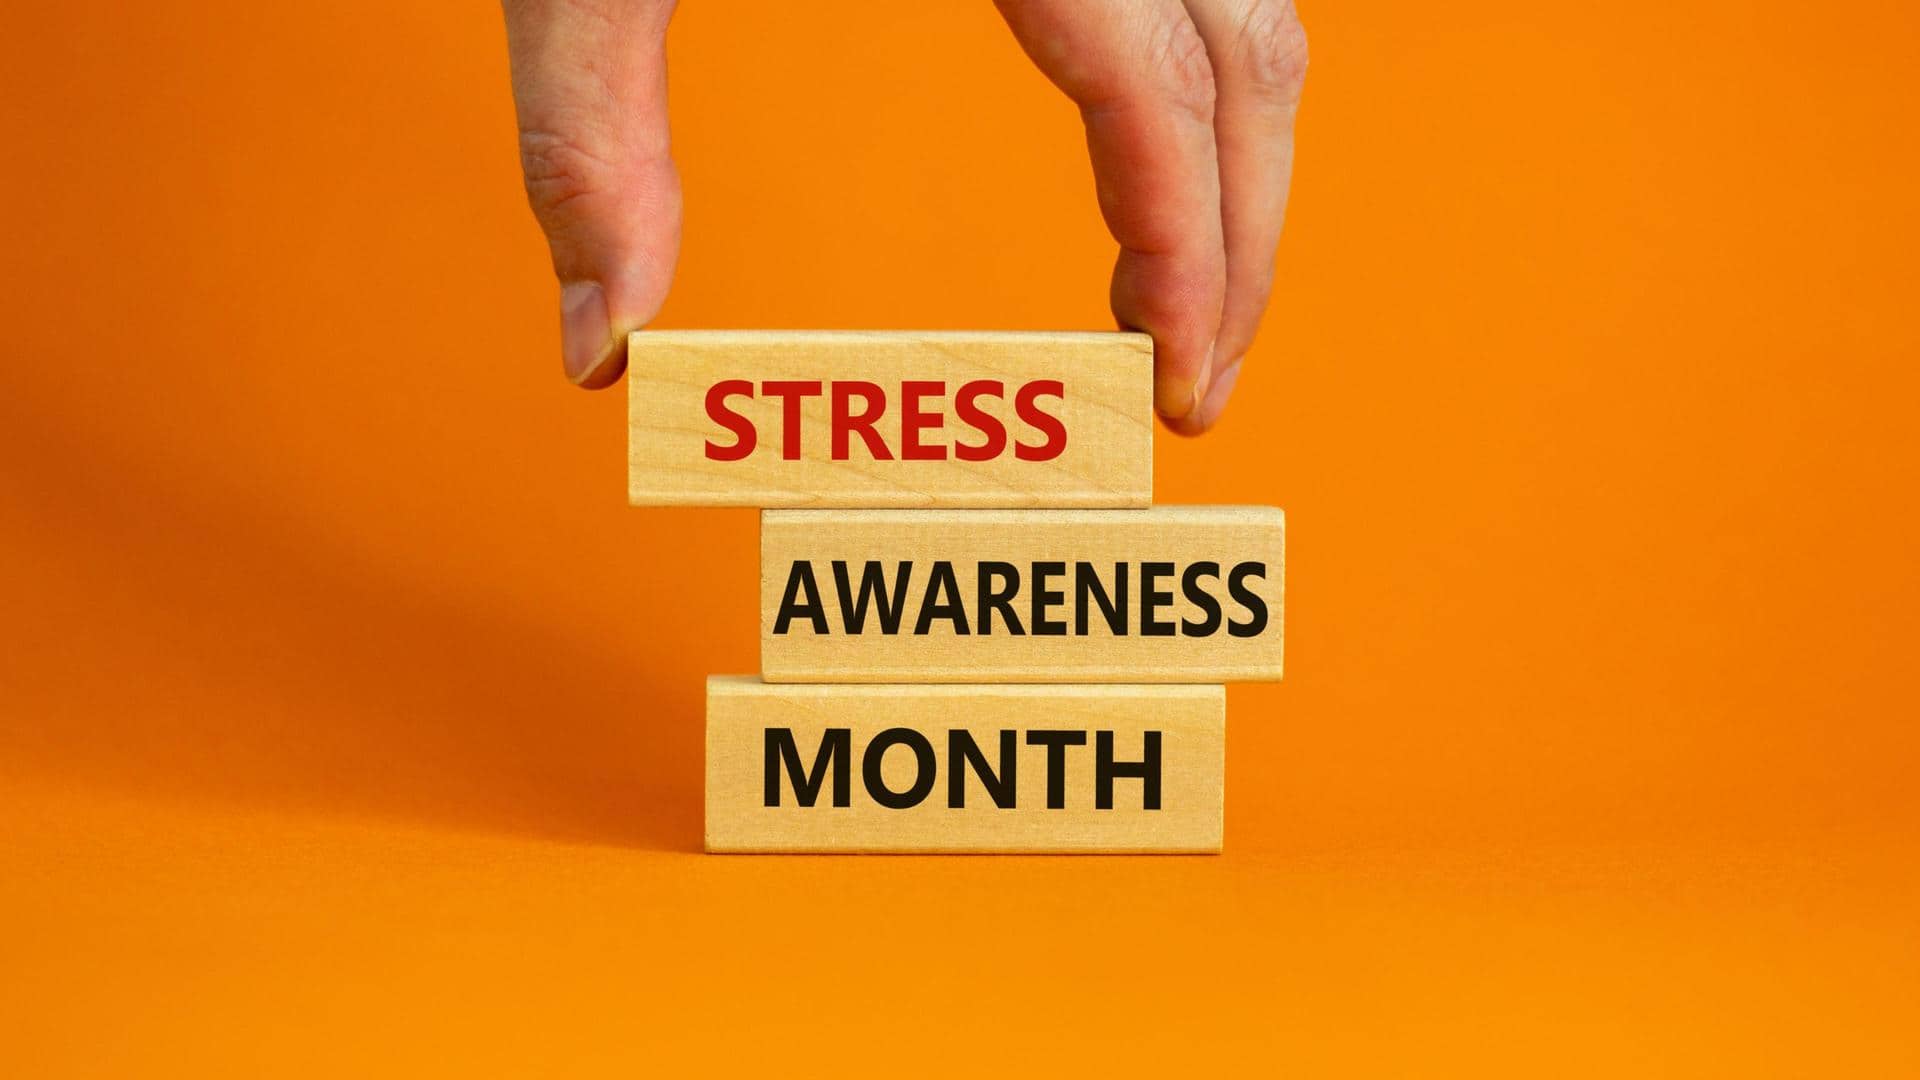 Stress Awareness Month: Try these fun de-stressing activities at home